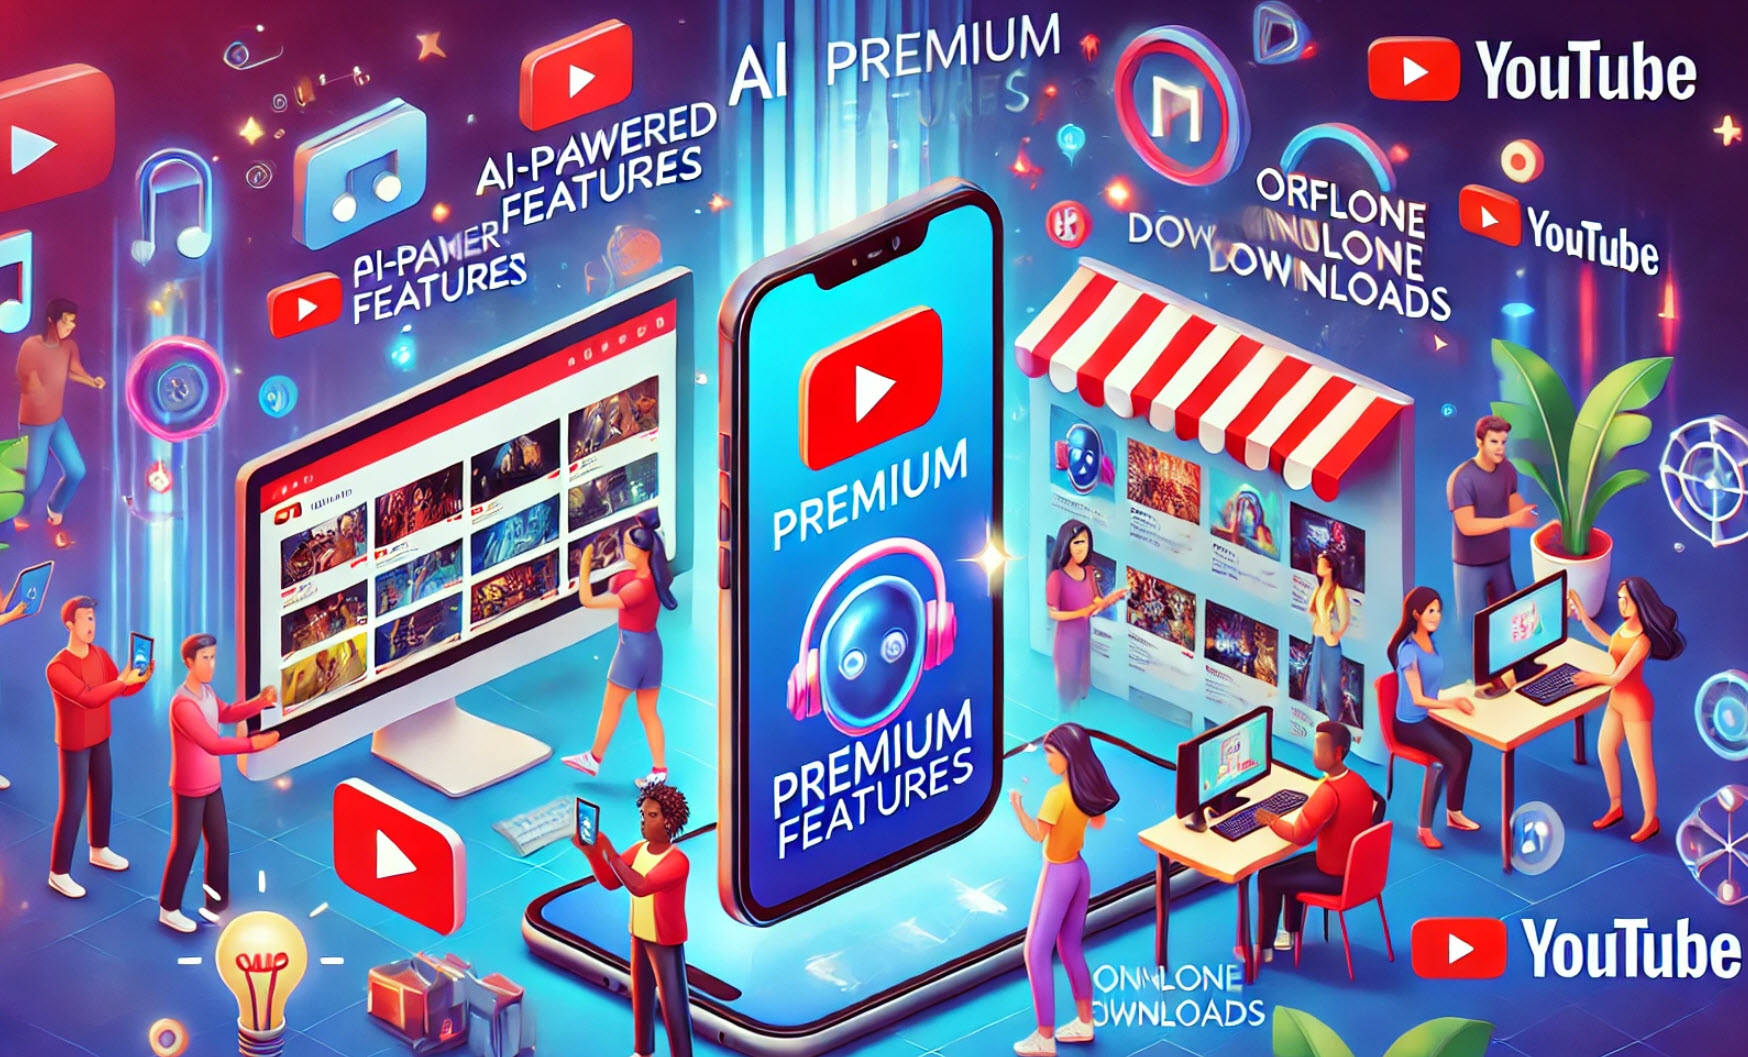 New YouTube Premium plans are on the way!